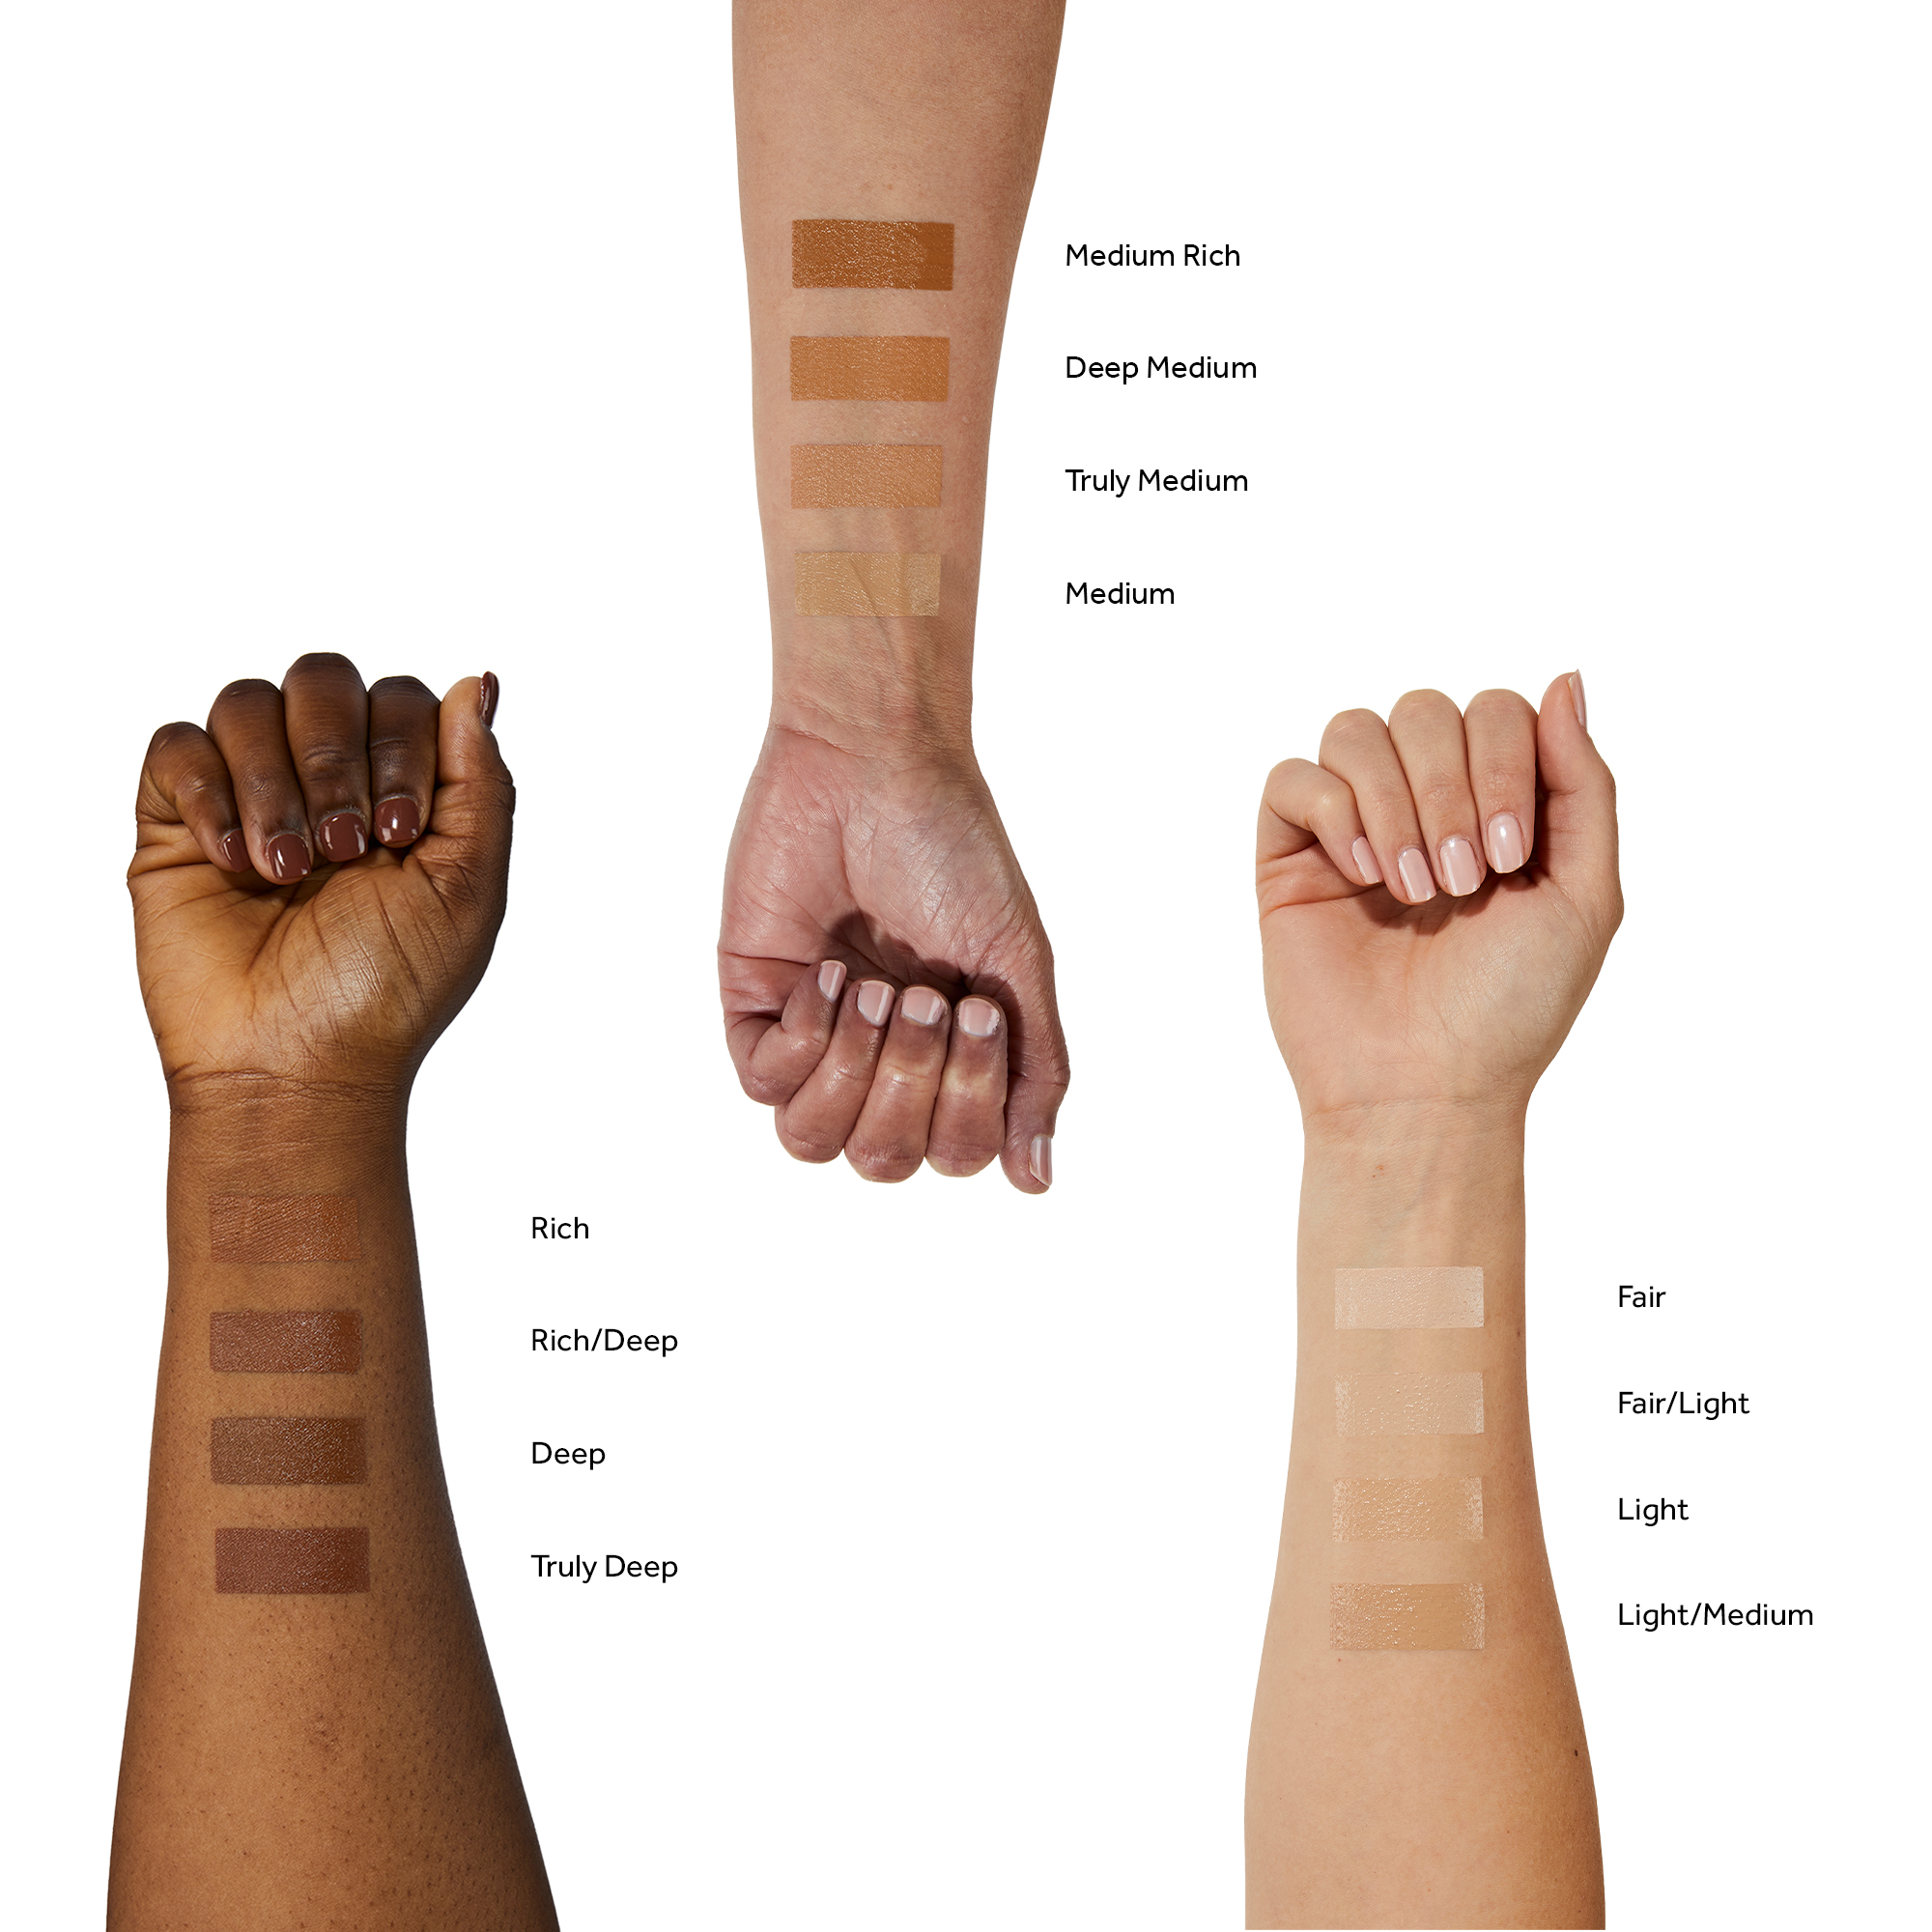 The image shows the different shades applied on arms with different skin tones. There are three arms in total and the shades are as follows, Rich, Rich Deep, Deep, Truly Deep, IIP, Medium Rich, Deep Medium, Truly Medium, Medium, Fair, Fair/Light, Light, Light/Medium